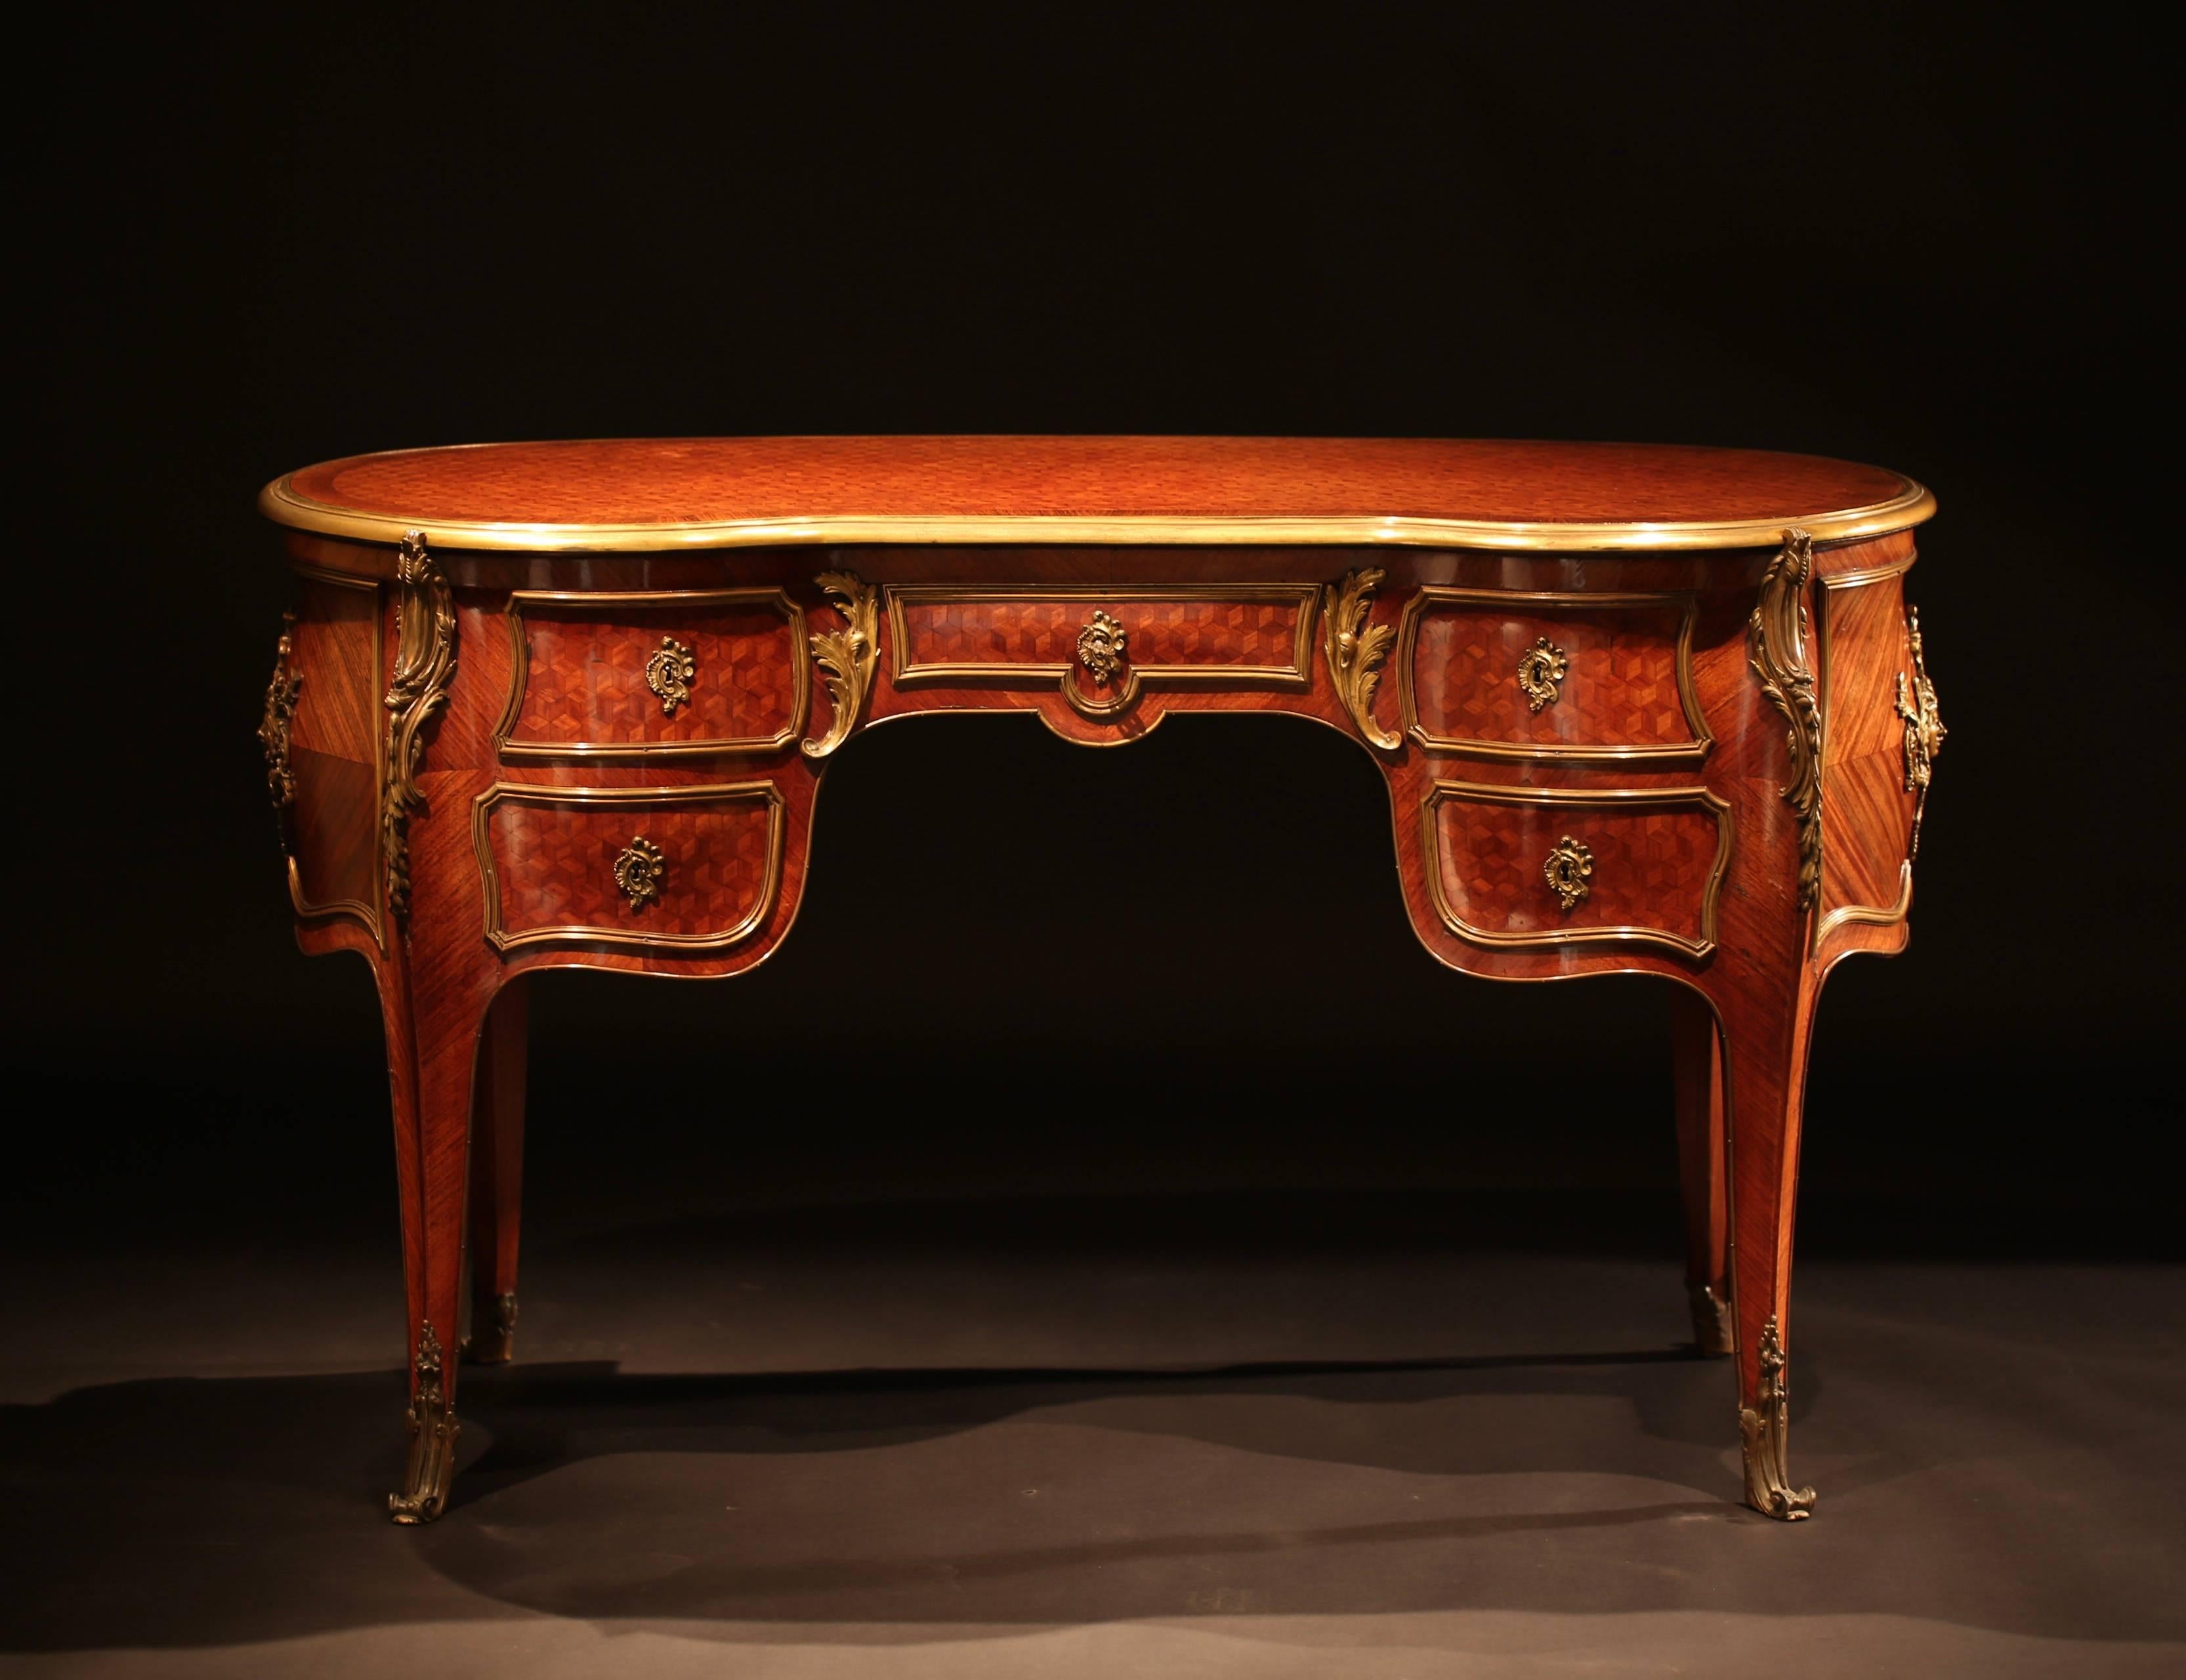 A good quality 19th century French Louis XV style parquetry and ormolu-mounted bureau plat of kidney and bombe shape, with five drawers. Very good condition, good quality mounts and relatively scarce shape. Stamped by J.A.S Shoolbred & Co (An